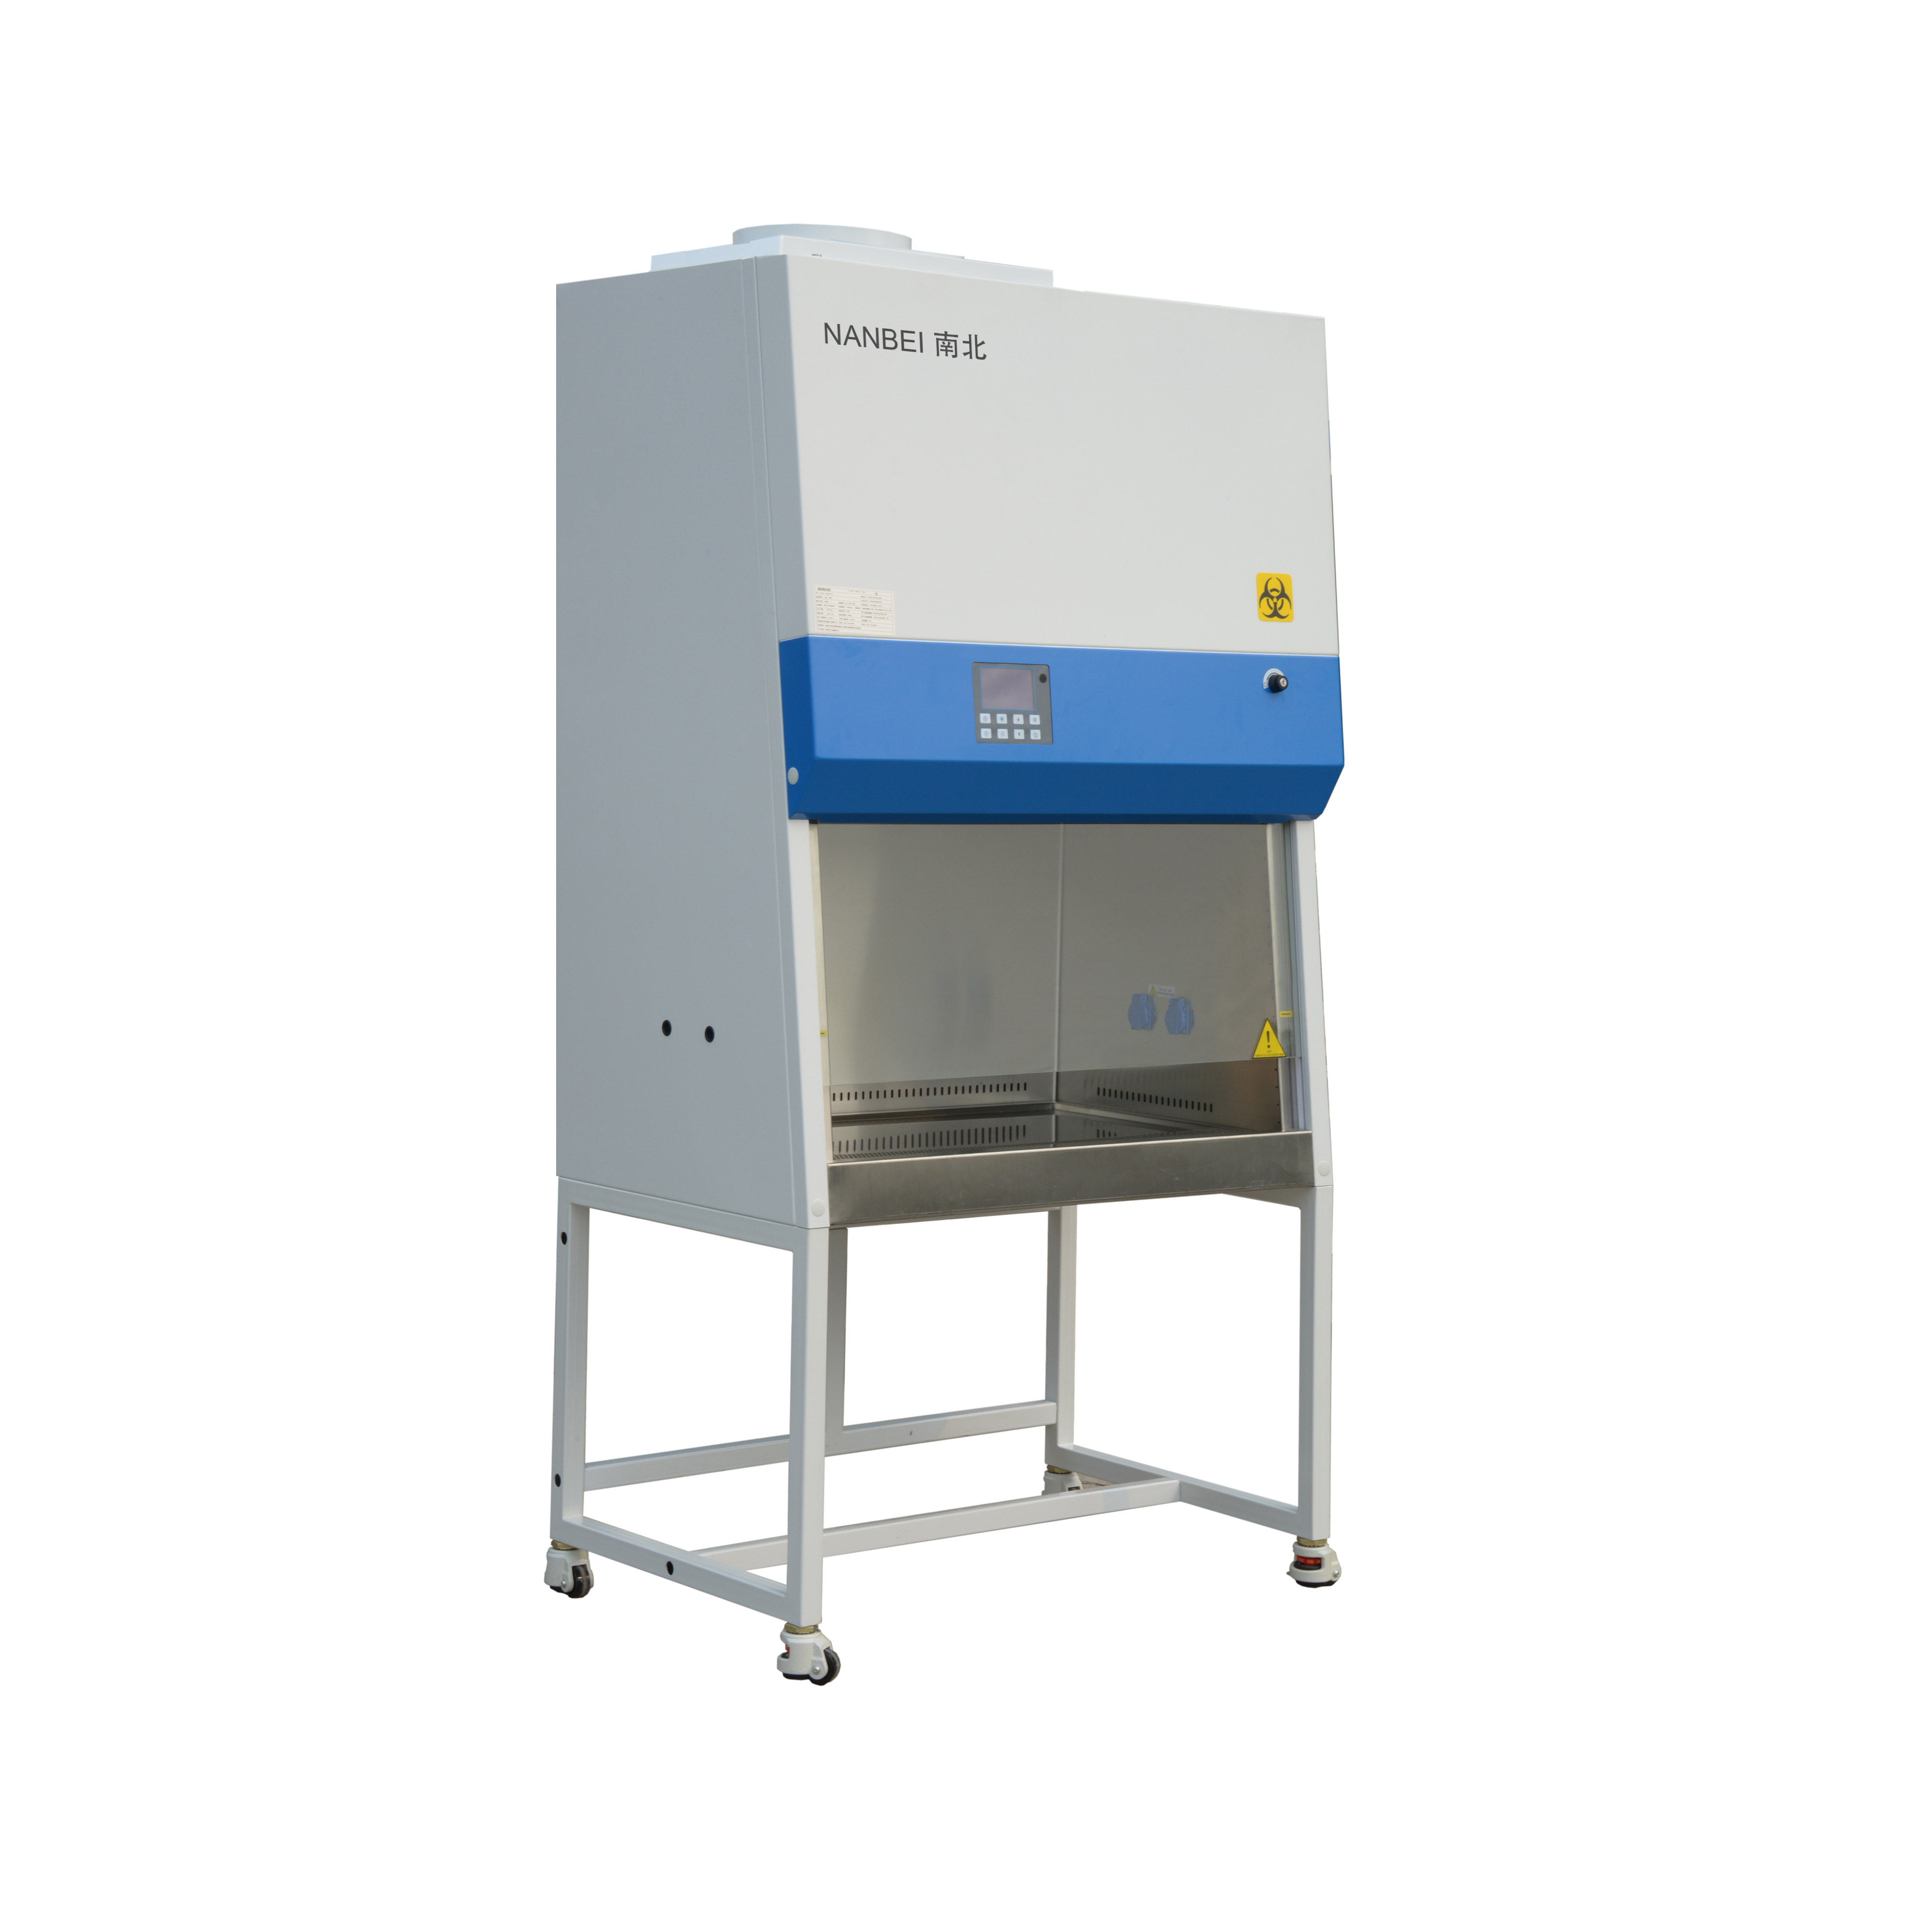 100% Exhaust single person Biological safety cabinet